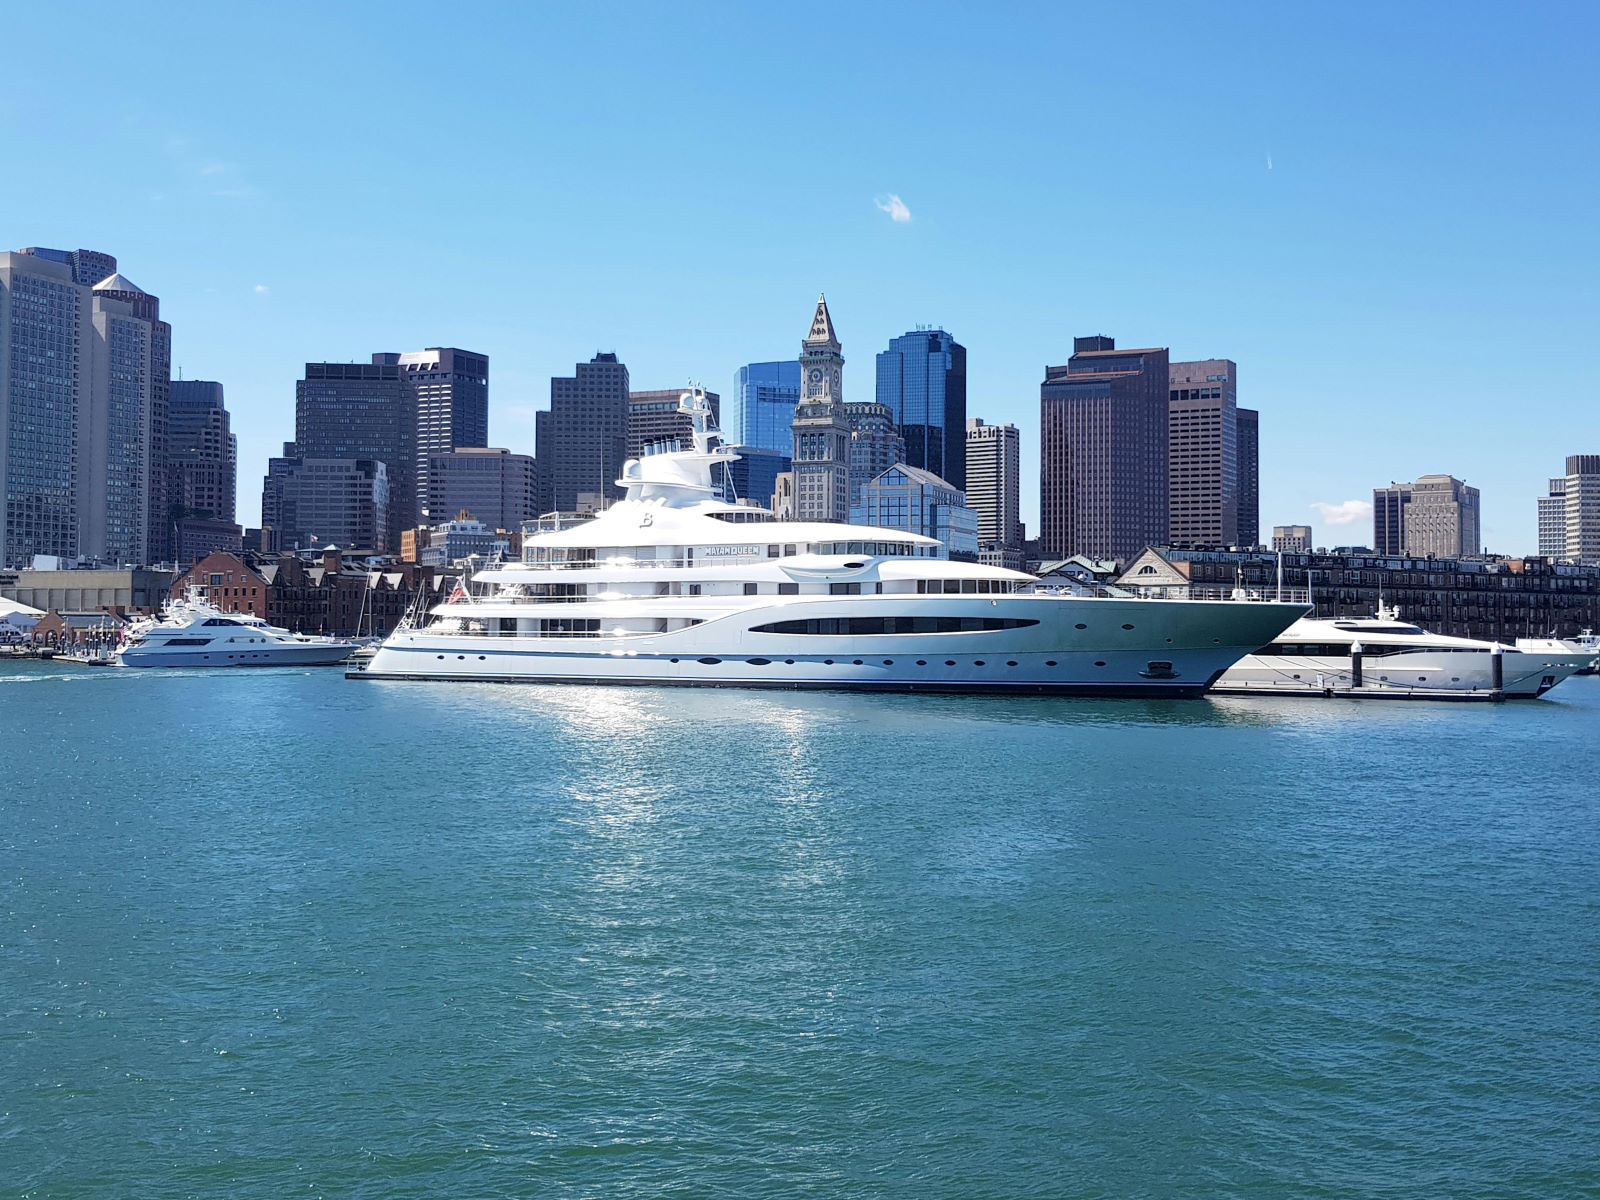 <p class="wp-caption-text">Image Credit: Pexels / Mohamed Hassan</p>  <p>See Boston from a different perspective with a harbor cruise. Learn about the harbor’s role in the Revolutionary War and enjoy breathtaking views of the skyline.</p>